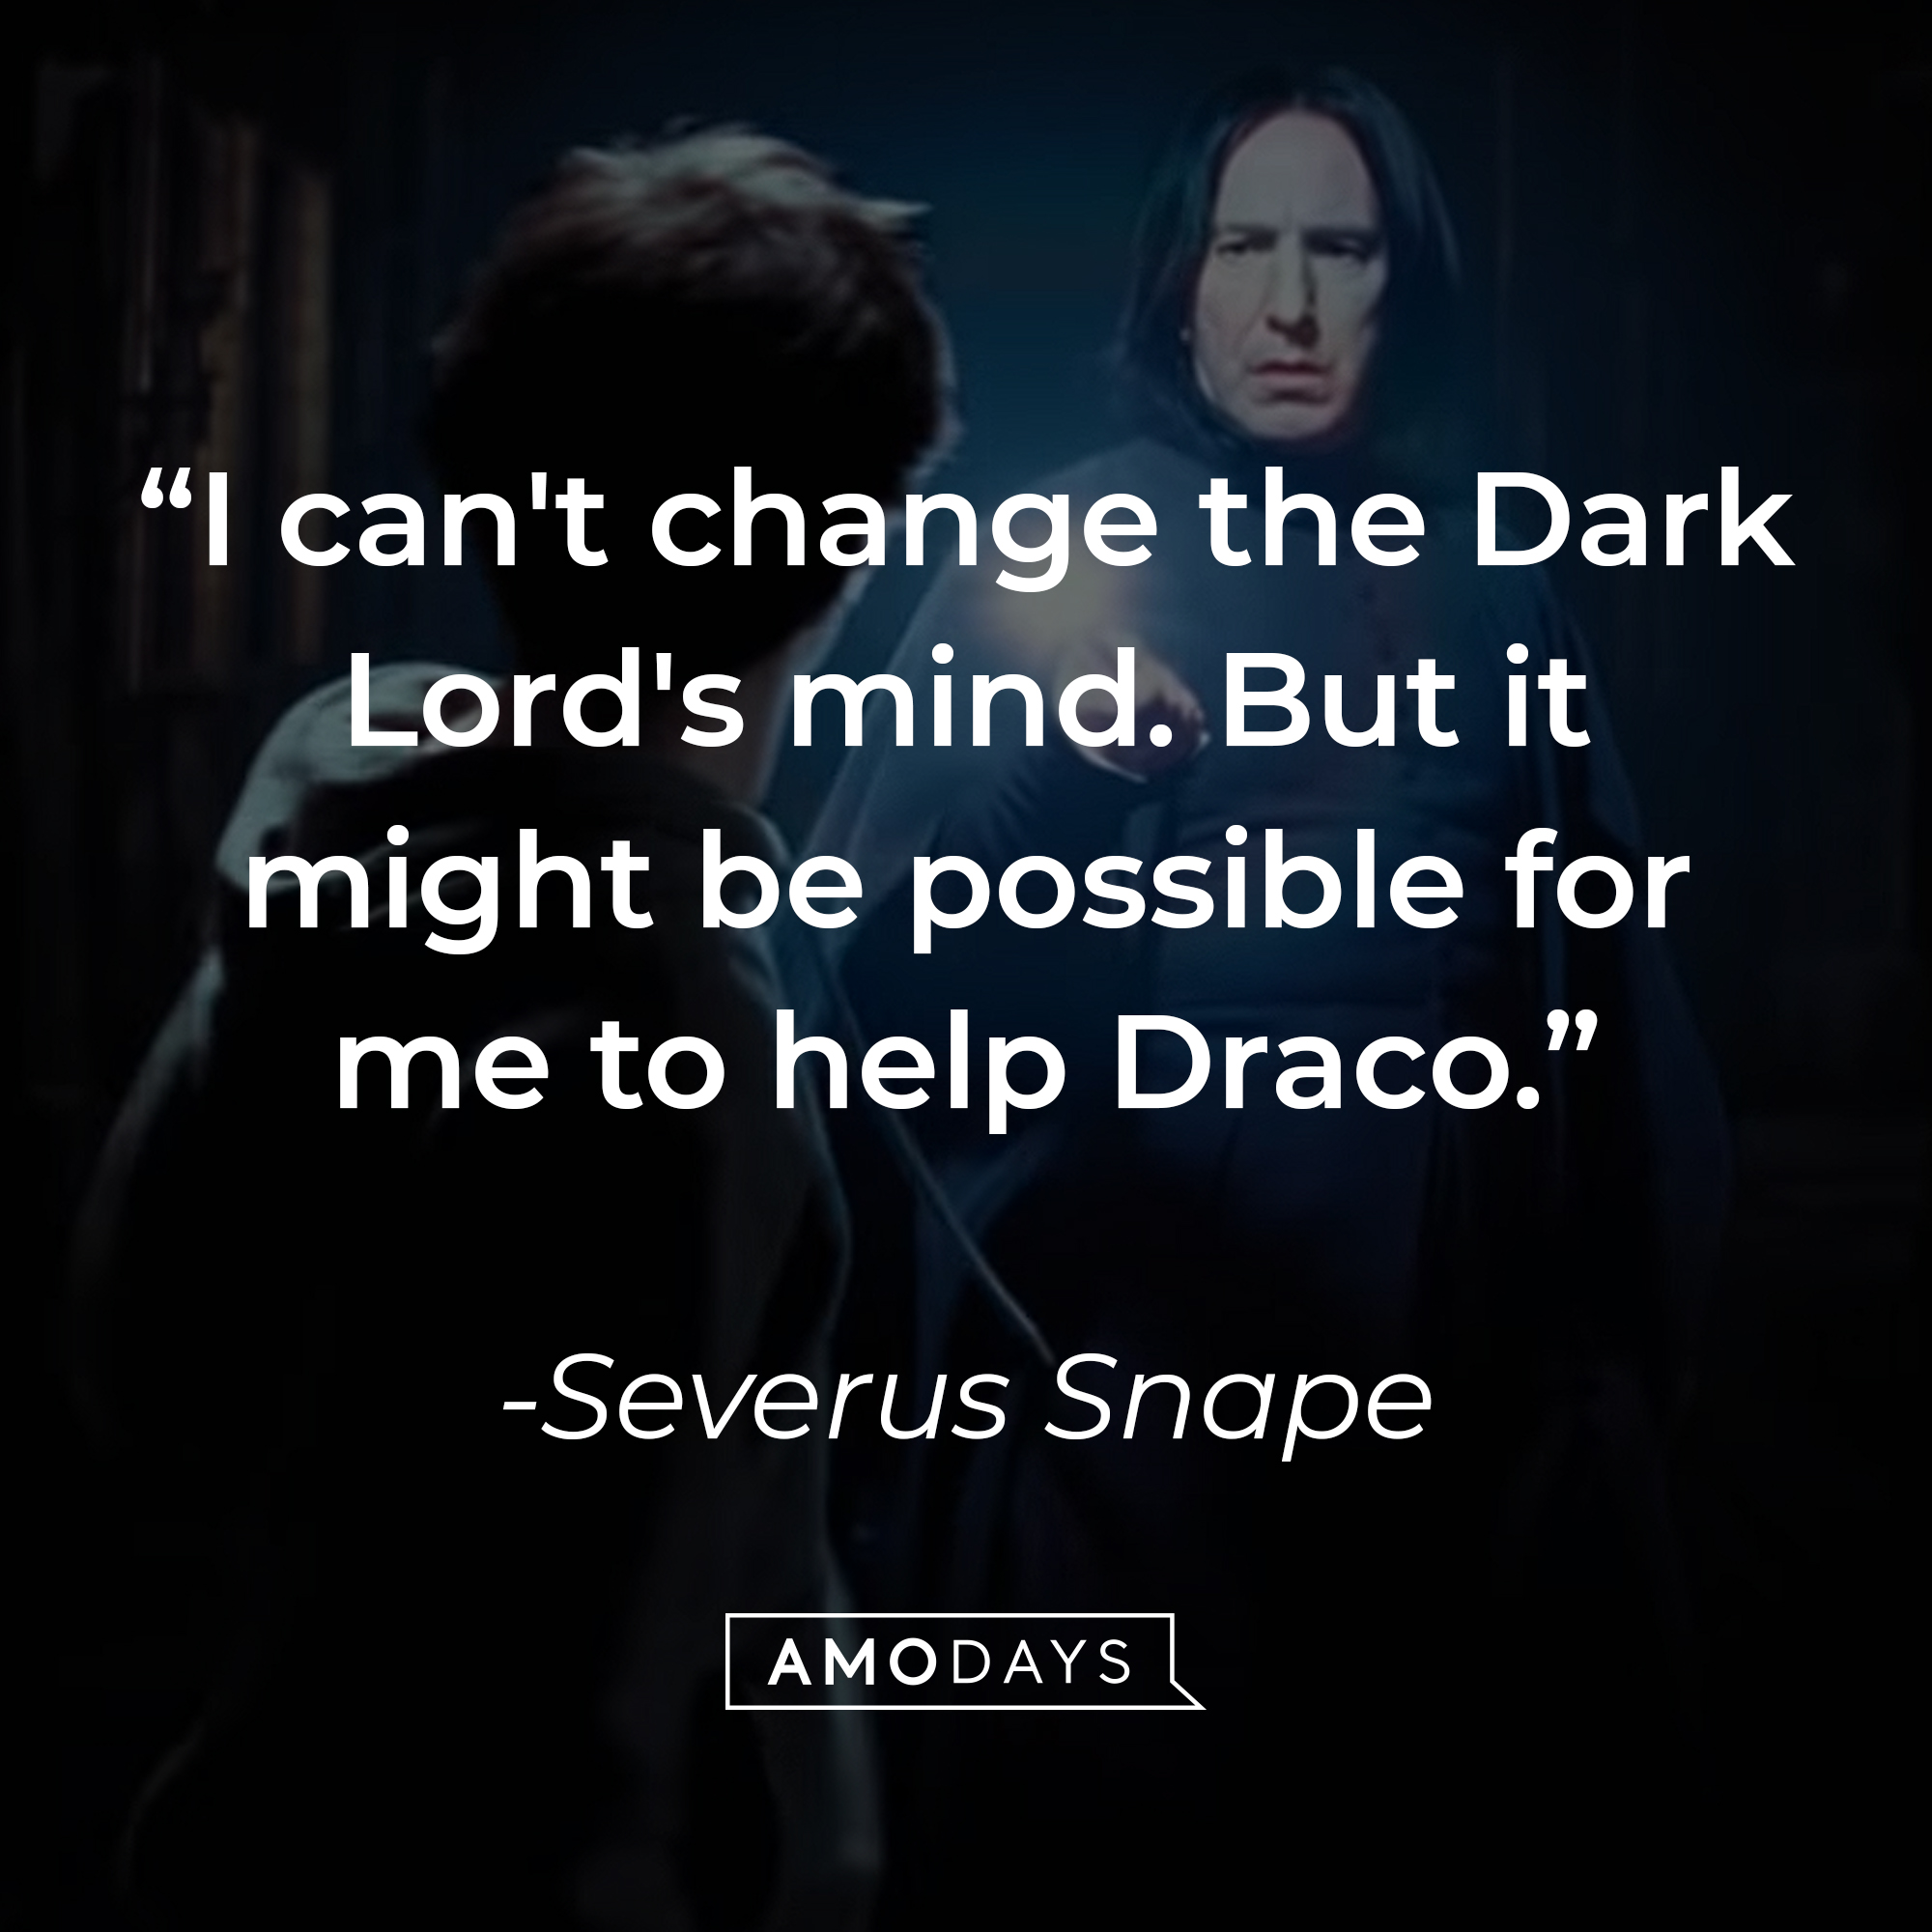 Severus Snape's quote: "I can't change the Dark Lord's mind. But it might be possible for me to help Draco." | Source: YouTube/harrypotter